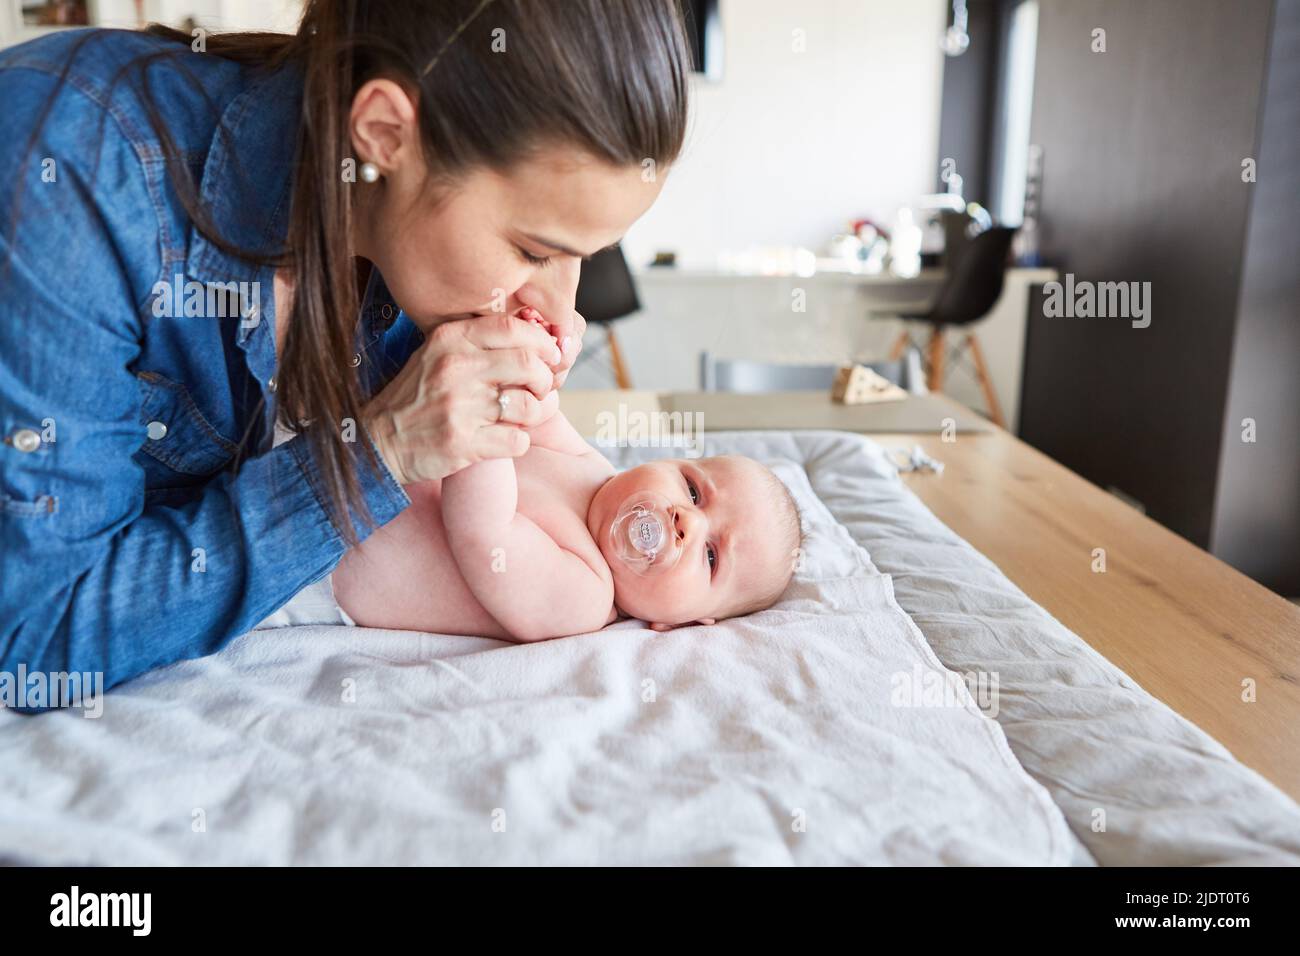 Loving mother gives her baby a kiss while changing diaper on the changing table Stock Photo